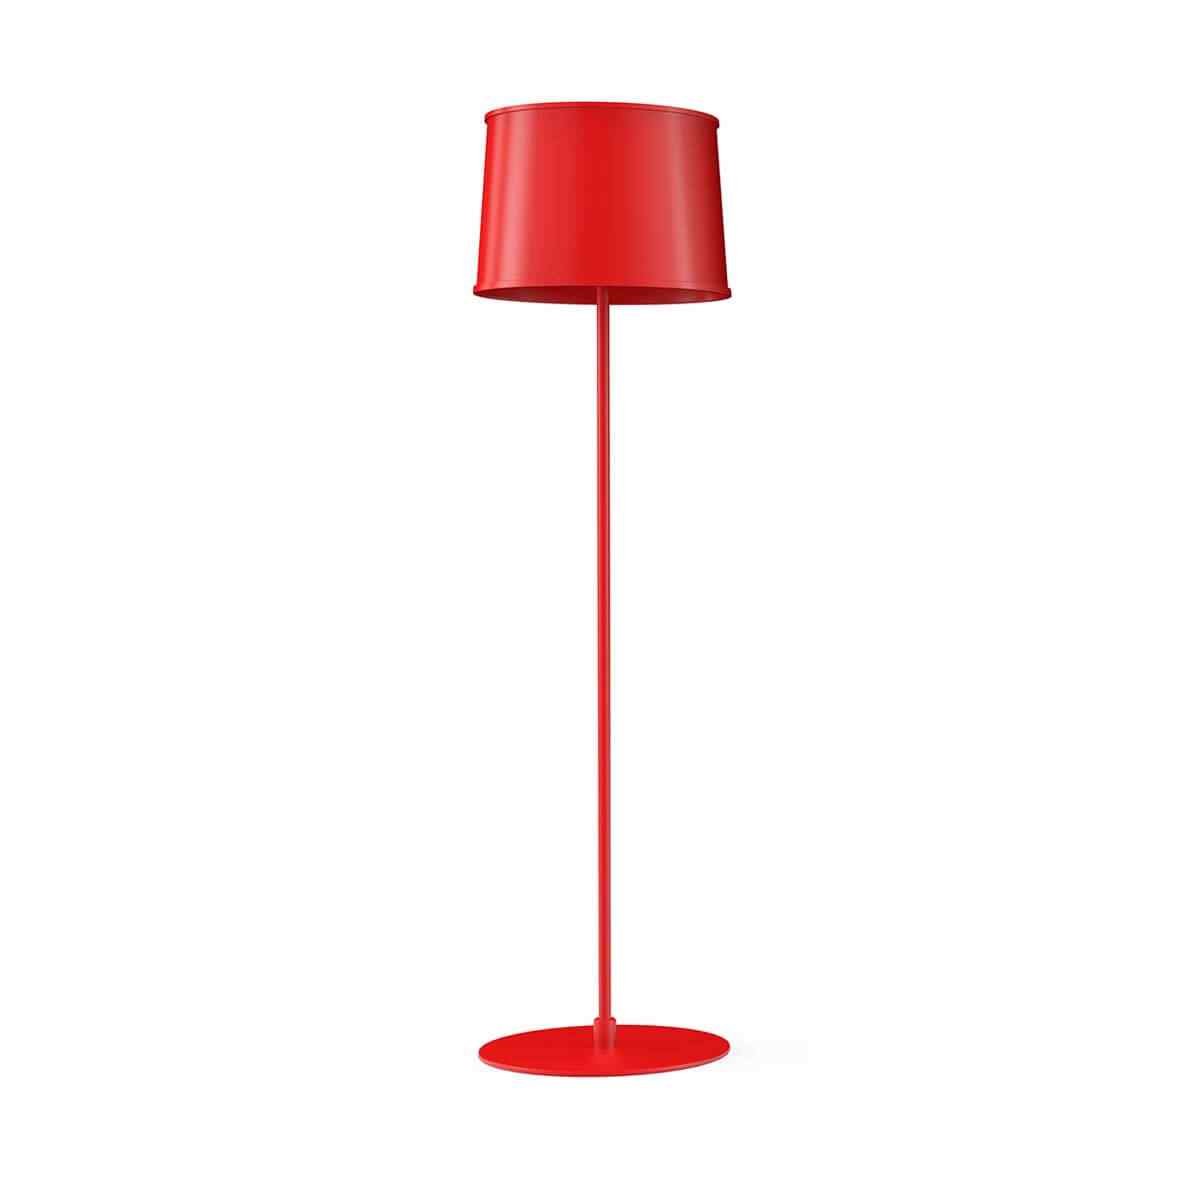 Viewamoon Red Maple Lamp Shades for Floor Lamps 13.58x13.58x8.27 Inch  Barrel Lamp Shades Polyester Fabric Lamp Shades Easy Assembly Replacement